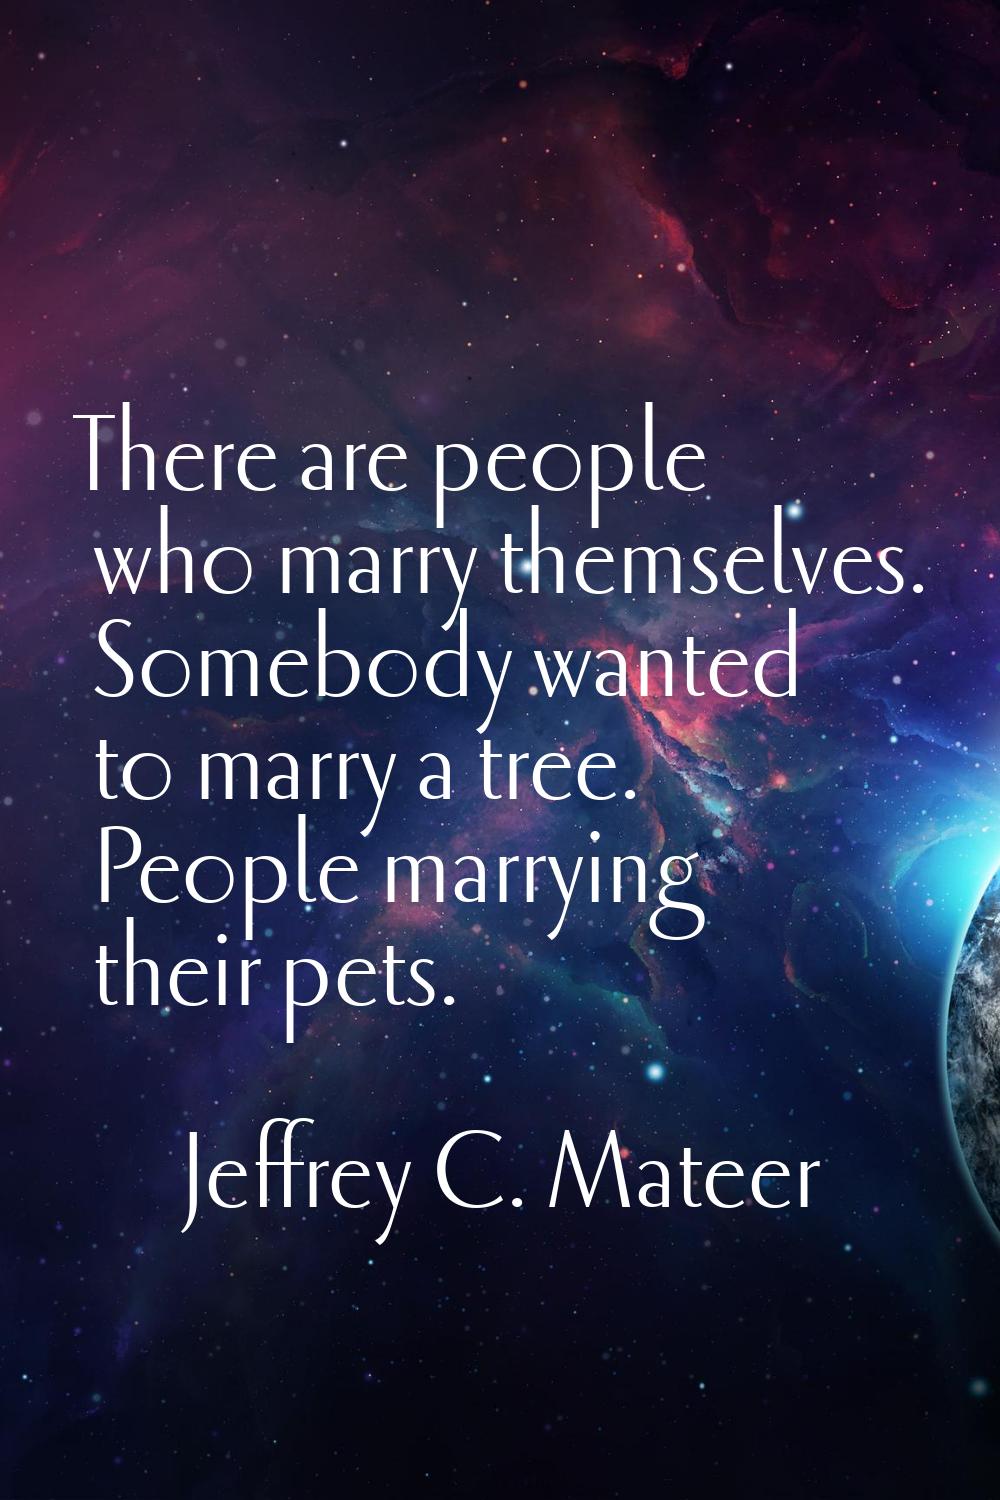 There are people who marry themselves. Somebody wanted to marry a tree. People marrying their pets.